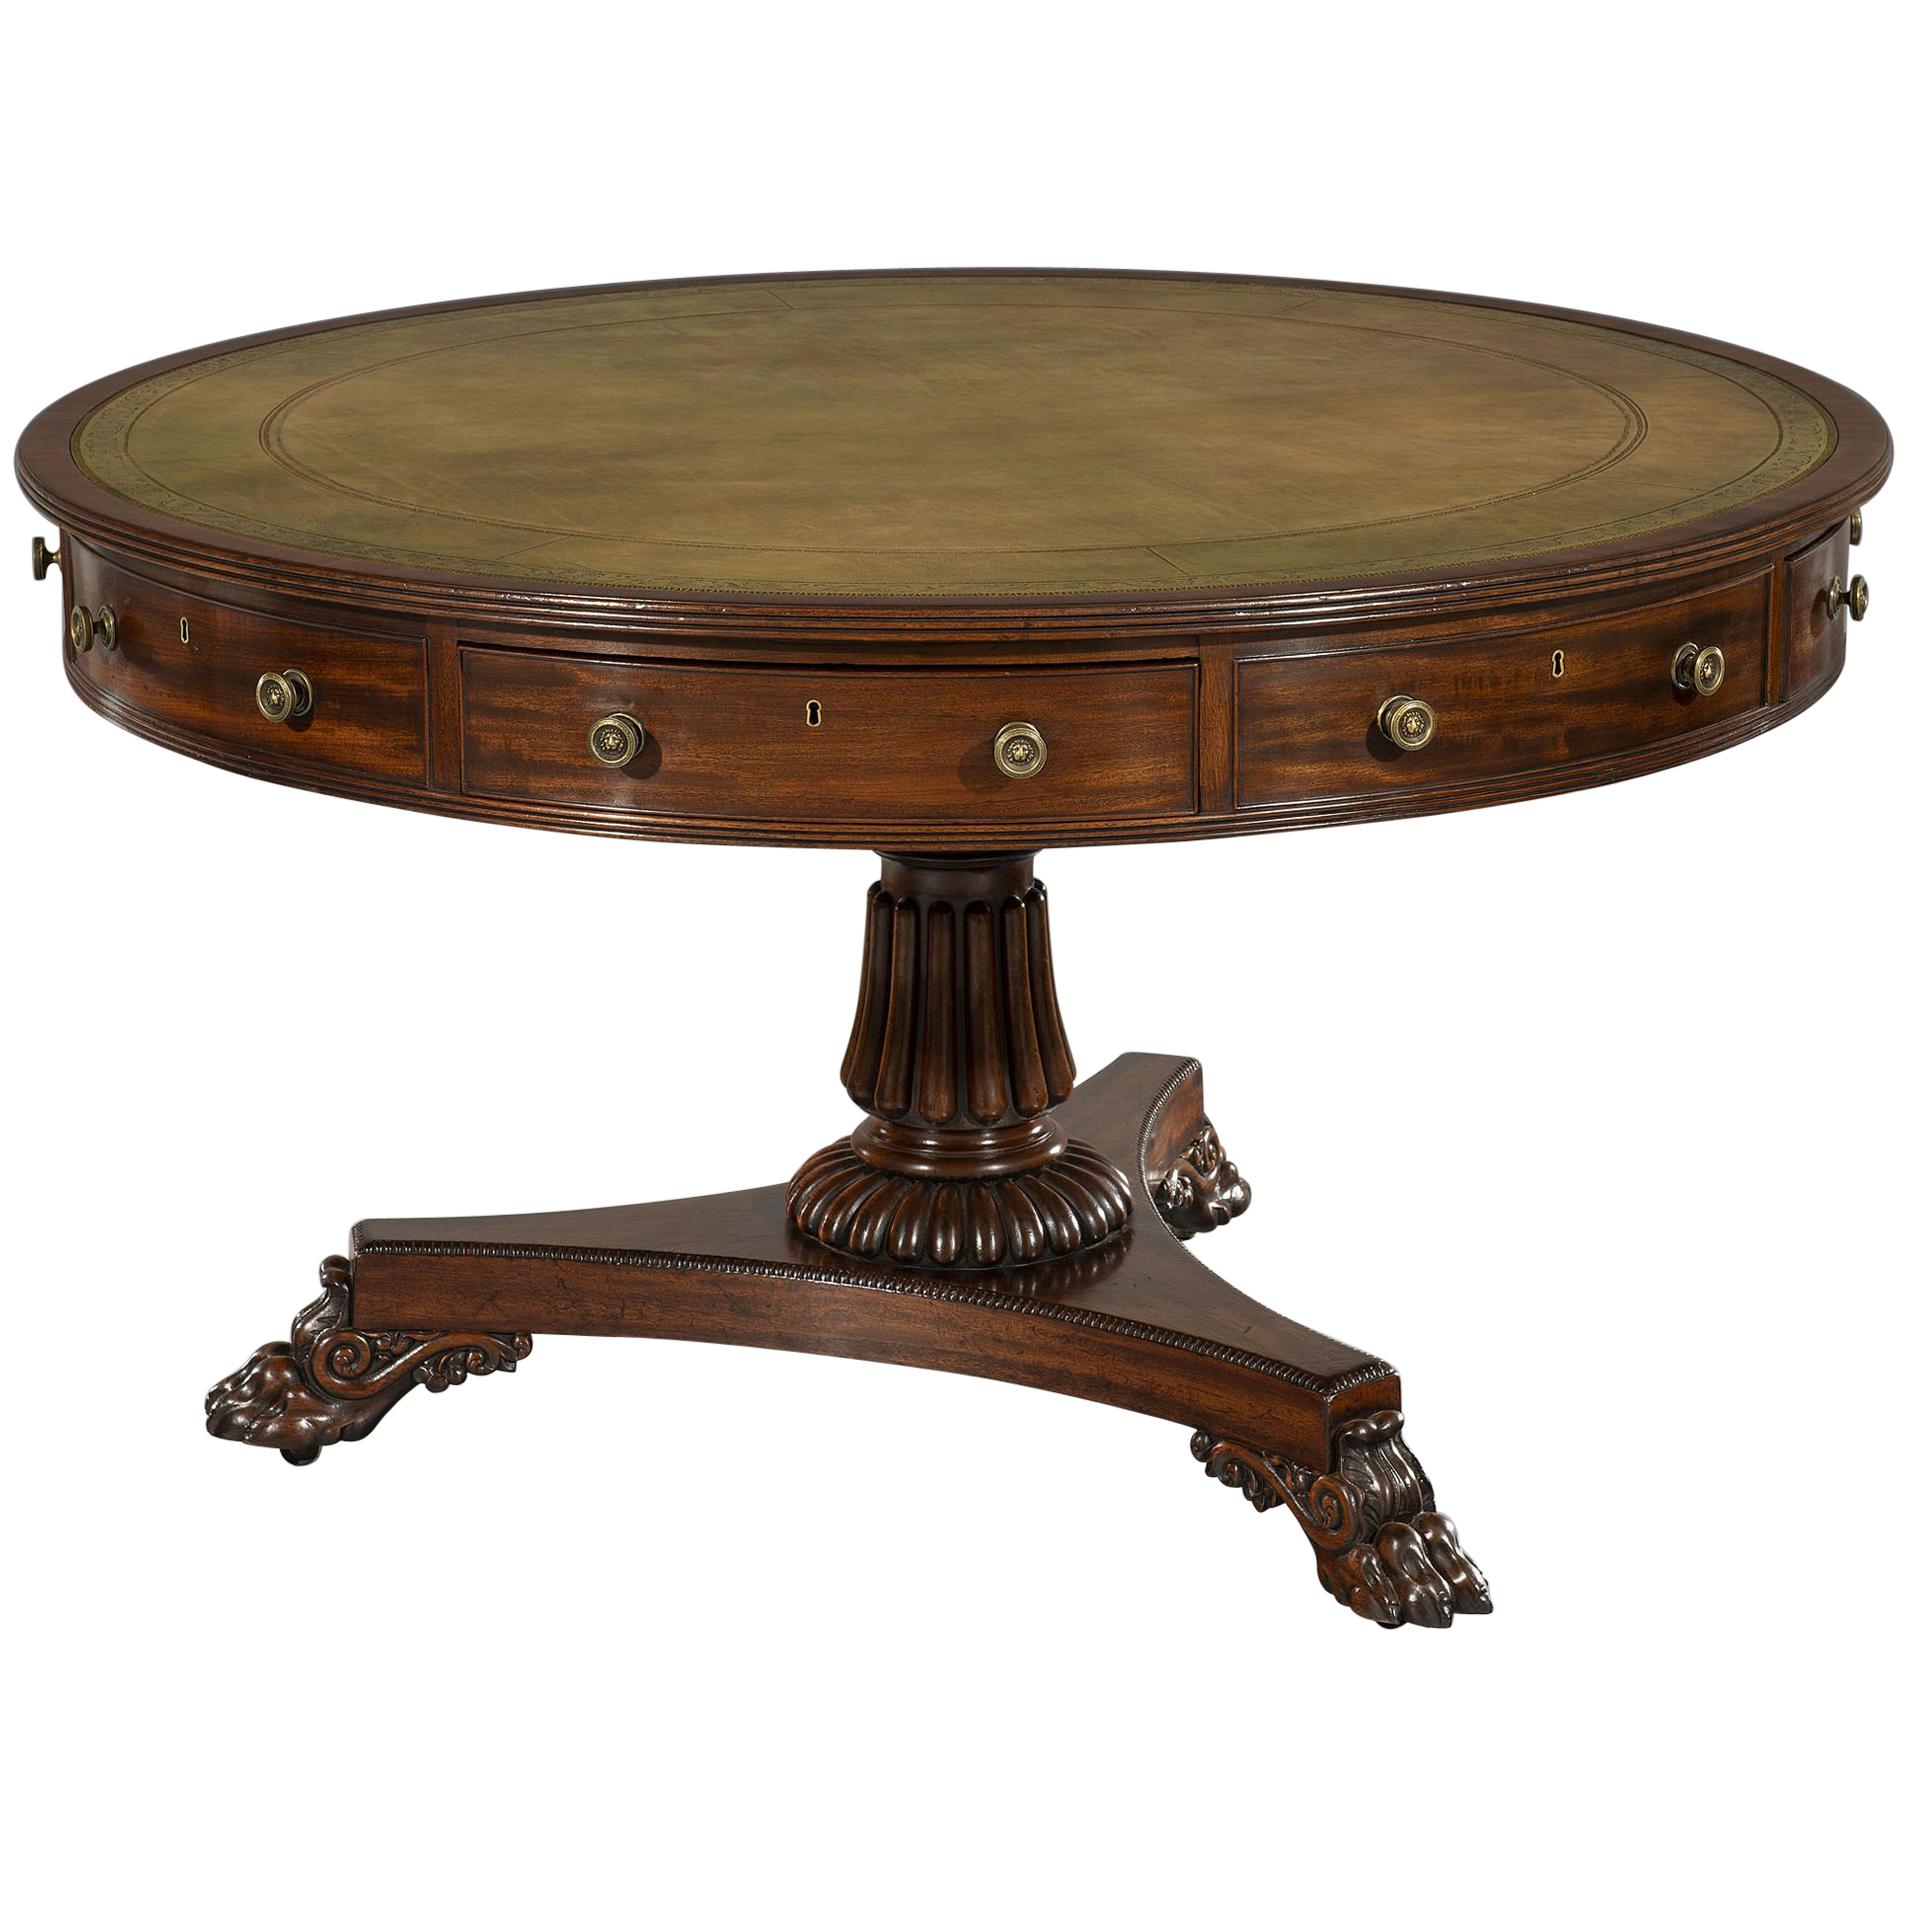 Late George III Regency Period Revolving Mahogany Drum Table by Gillows For Sale